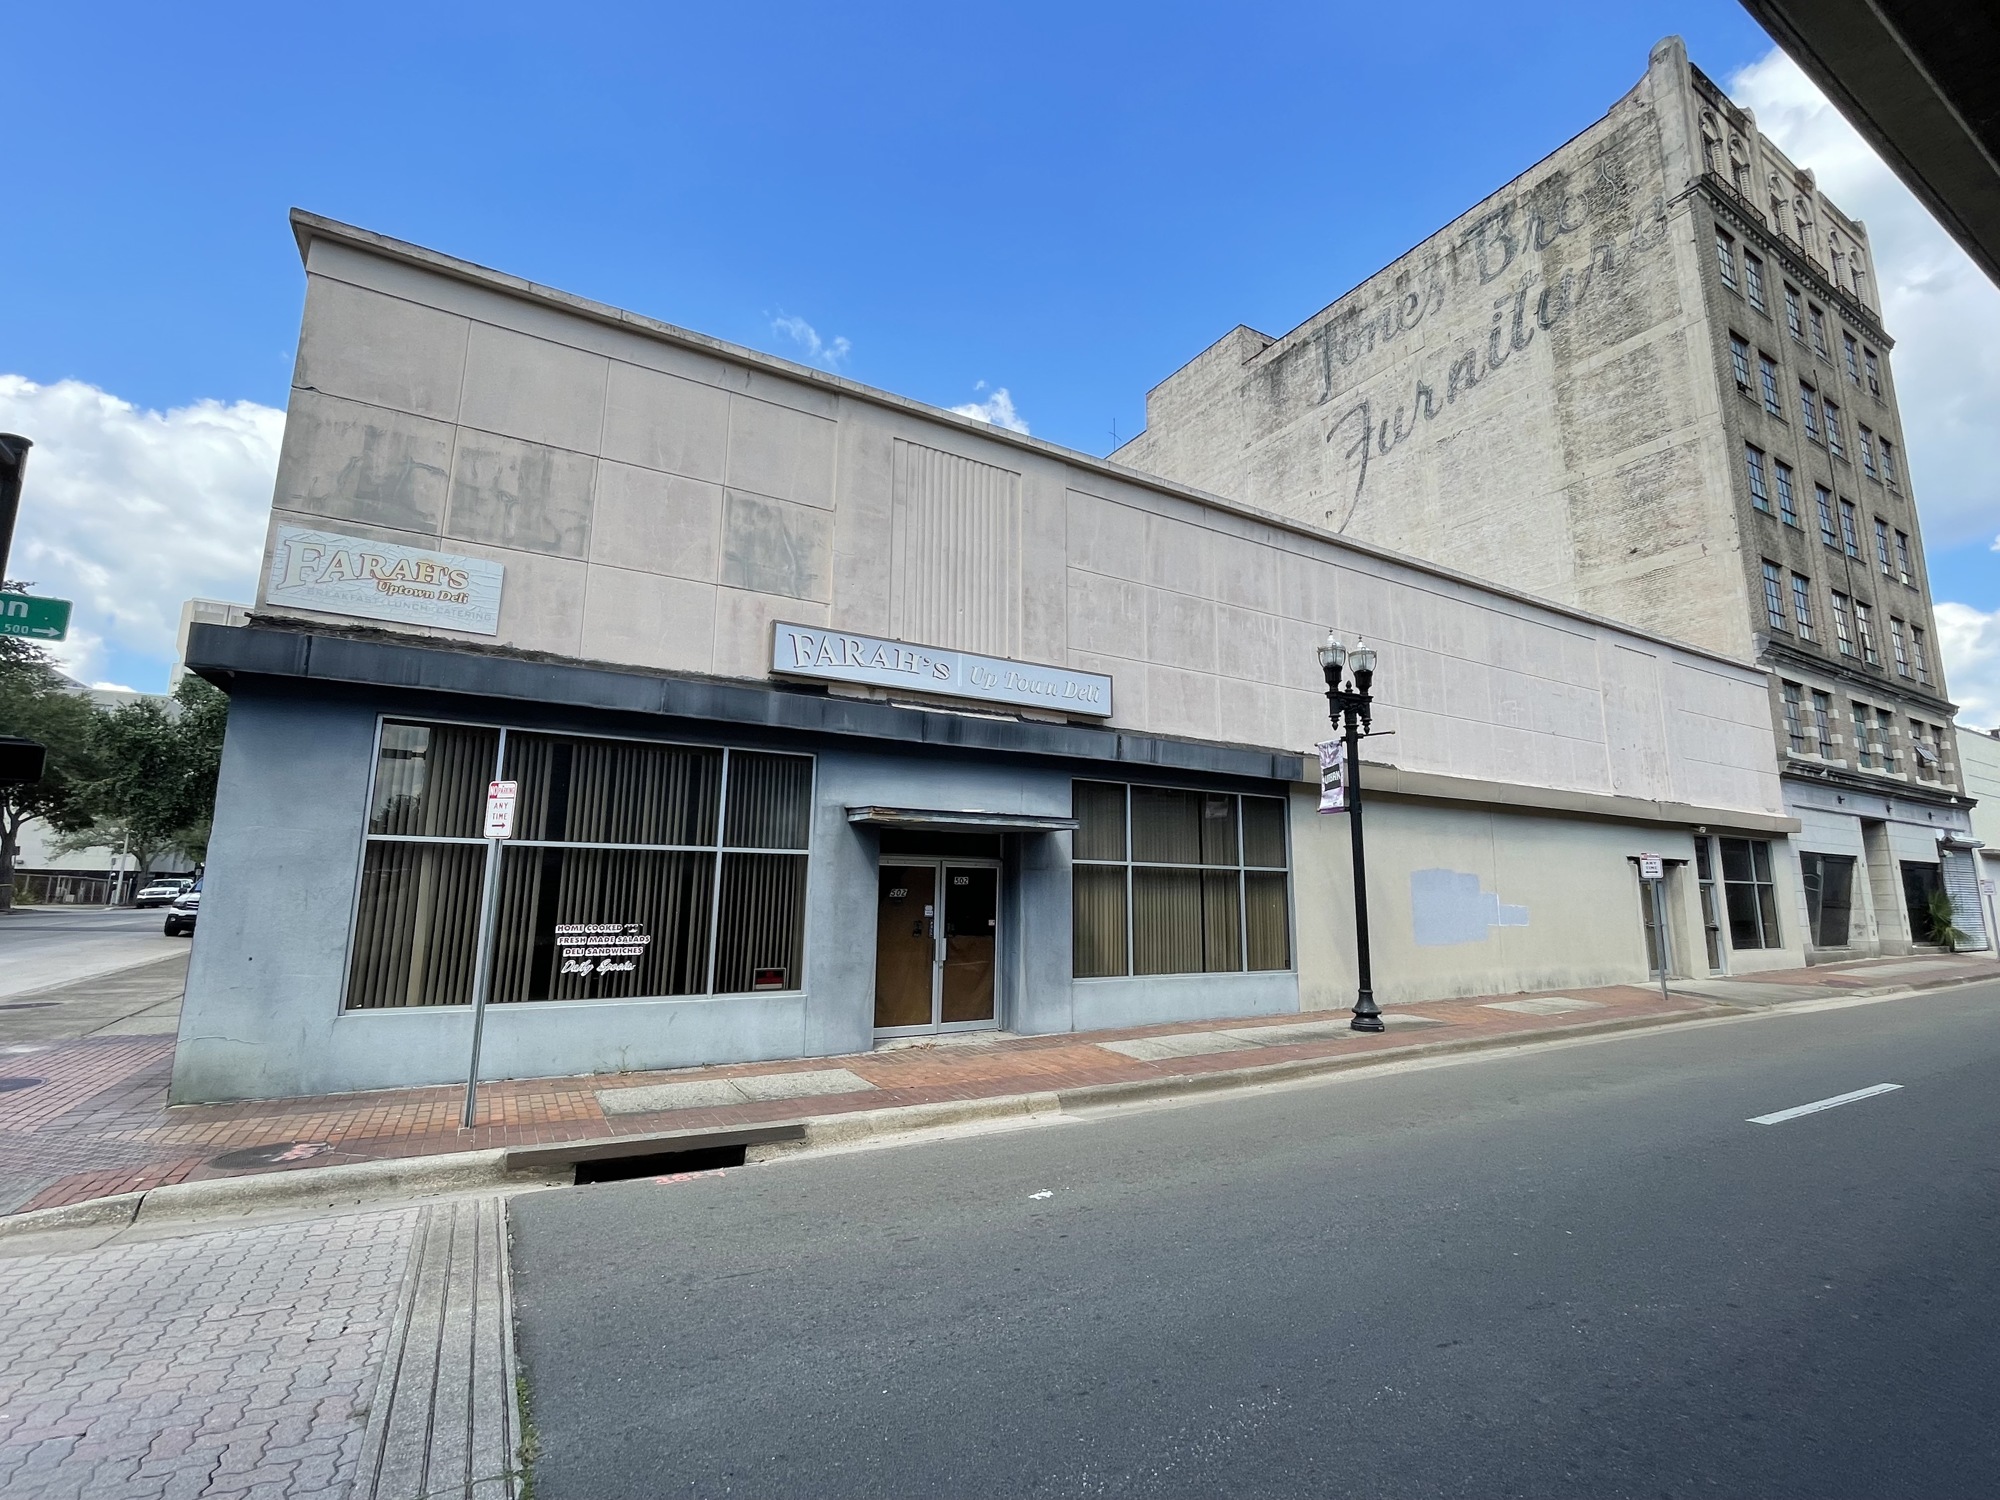 The developers of the Jones Bros. Furniture Co. building want to demolish the former Farah’s Uptown Deli building at Hogan and Church streets and build a six- to seven-story multifamily addition with about 60 apartments.